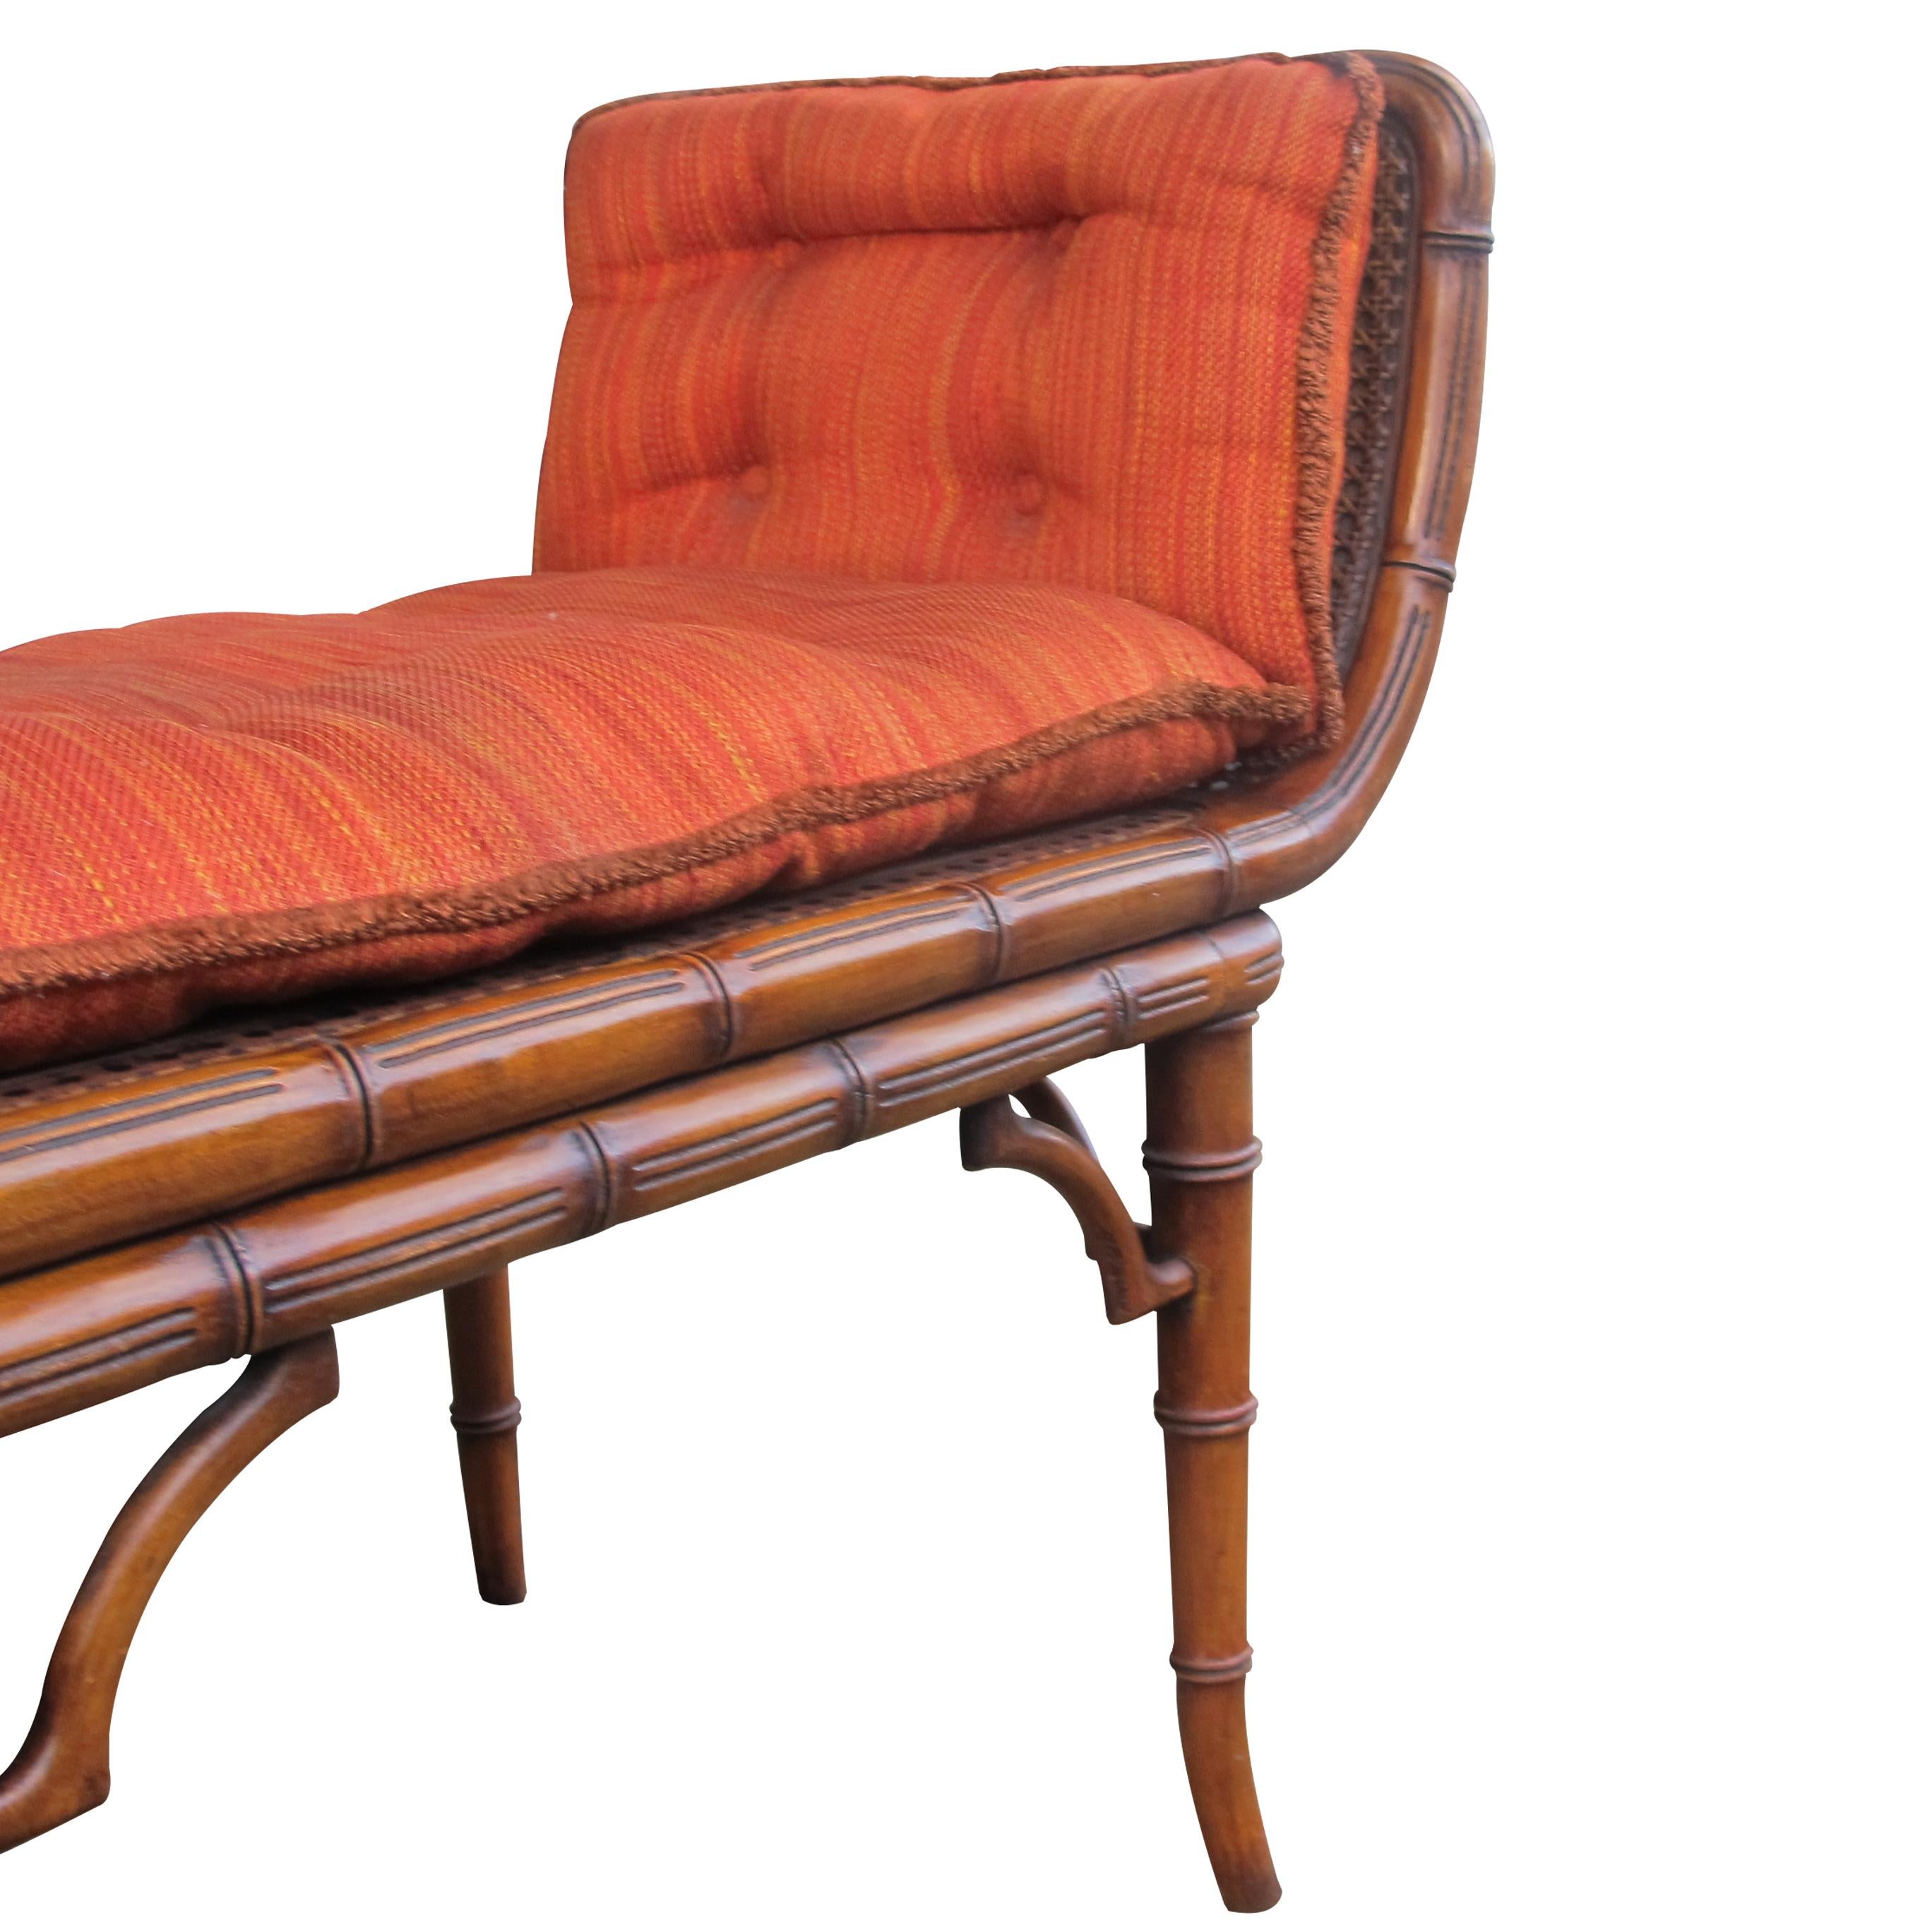 Other Italian 1940s Cane and Faux Bamboo Frame Bench with its Original Upholstery For Sale